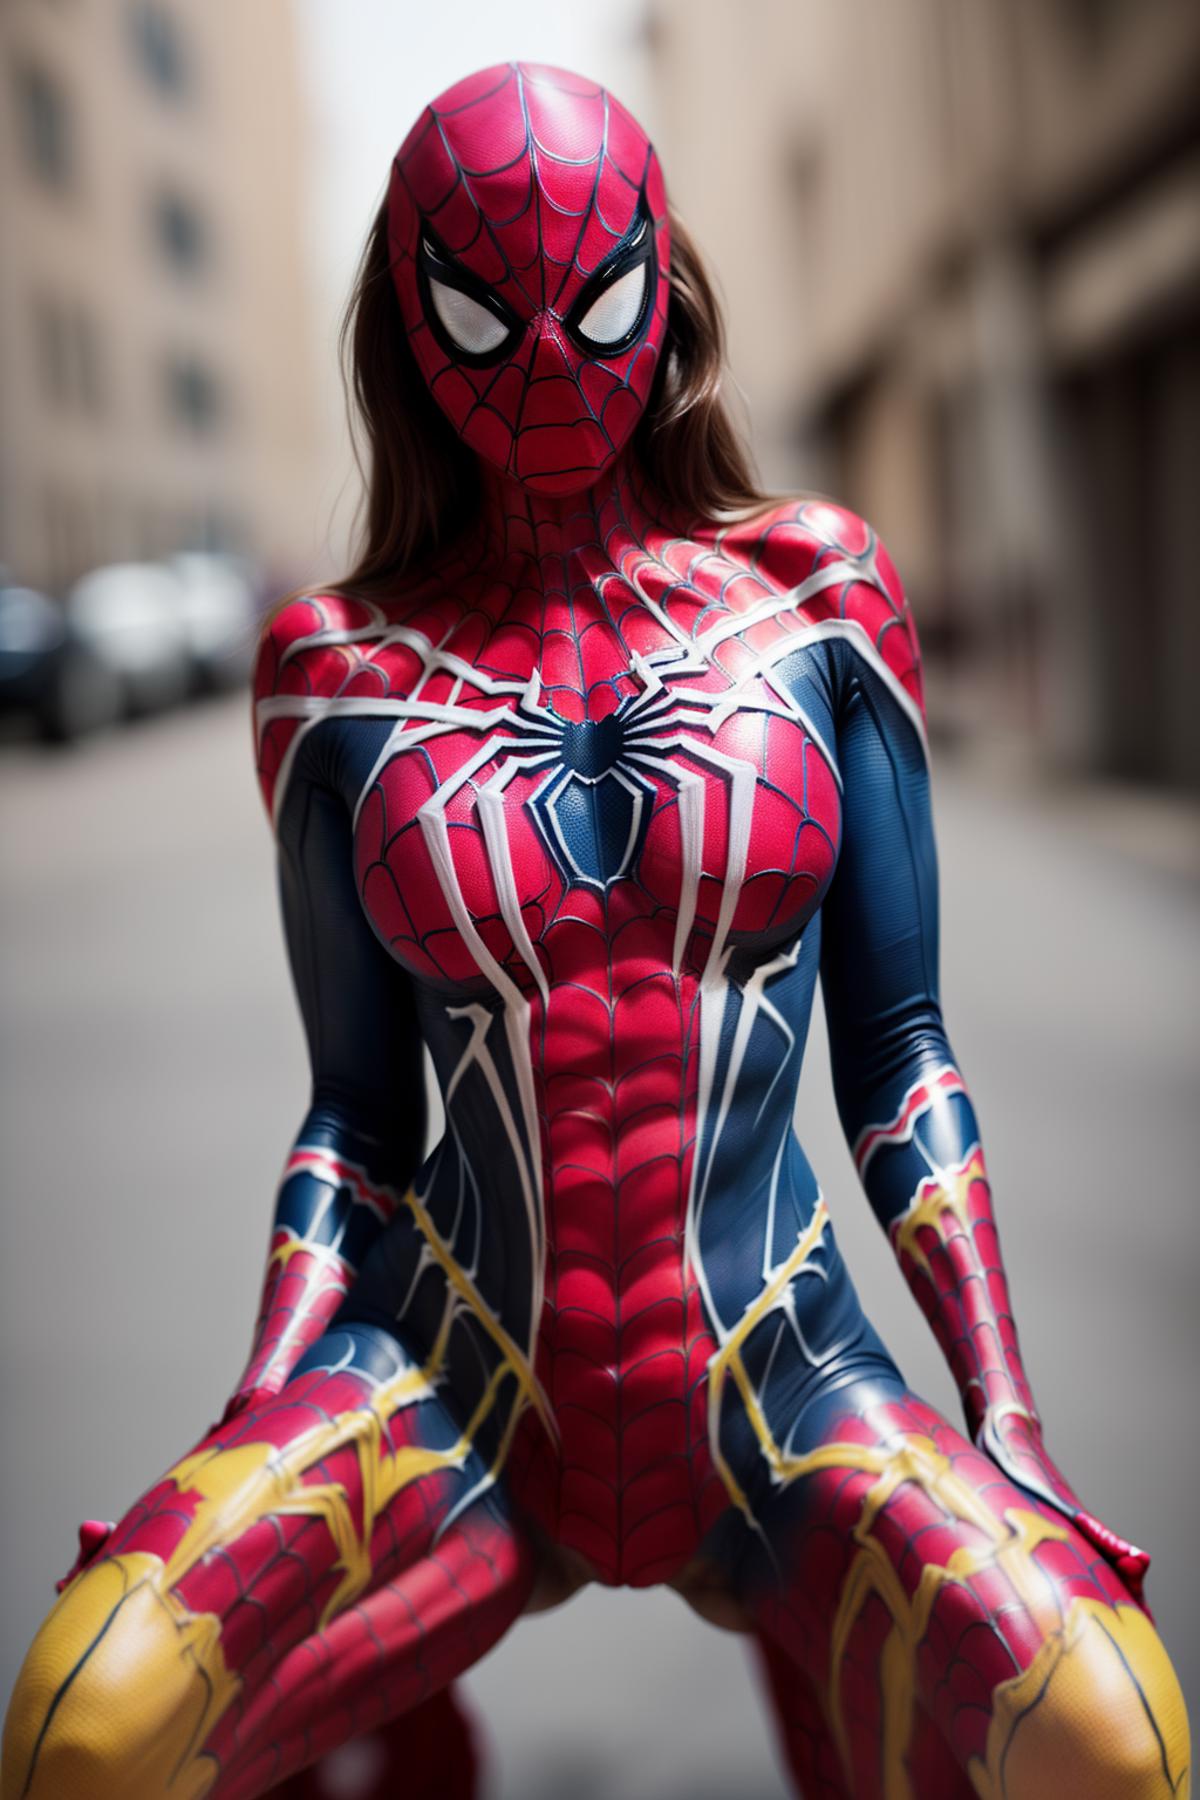 Body paint image by brair001